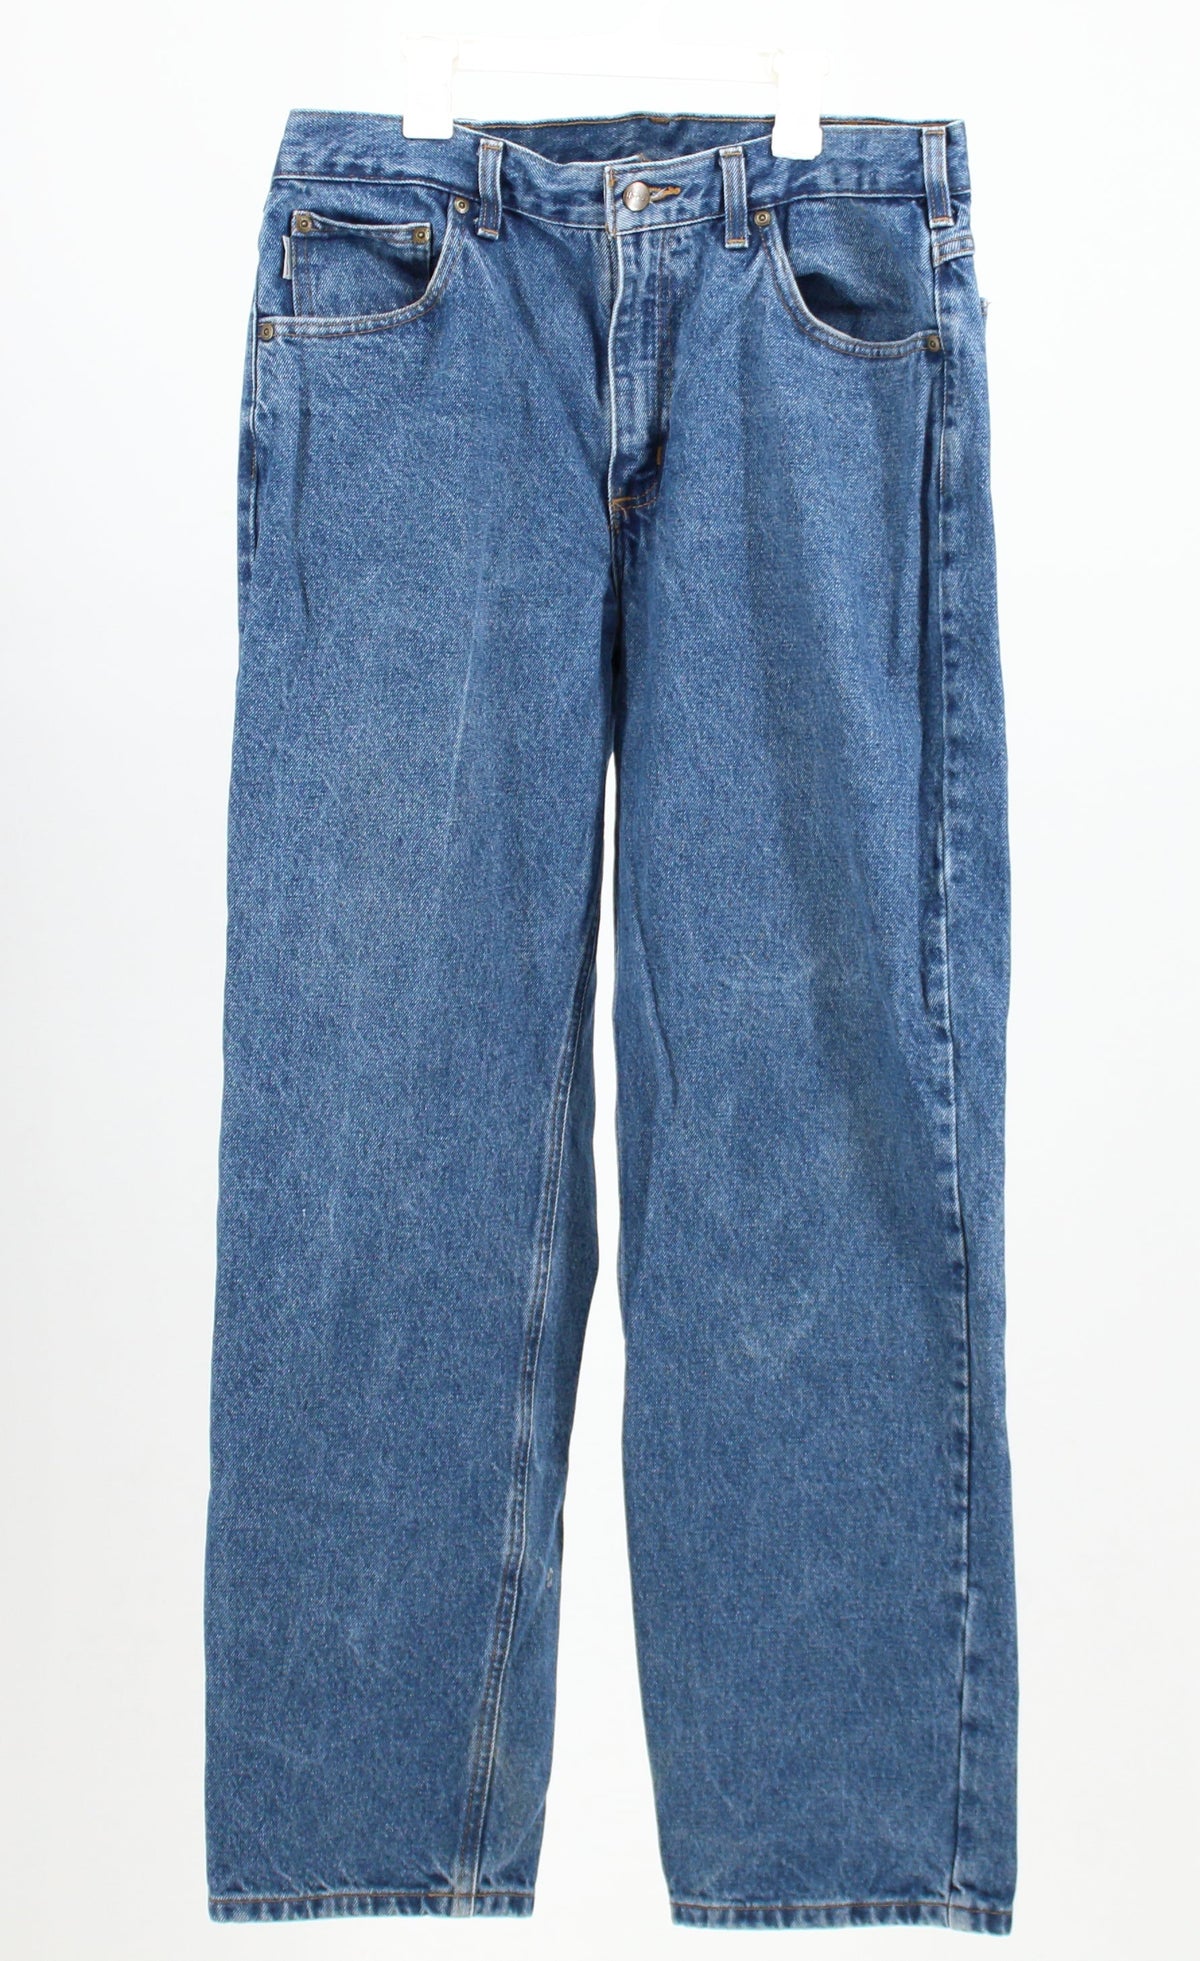 Carhartt Medium Washed Straight Baggy Jeans